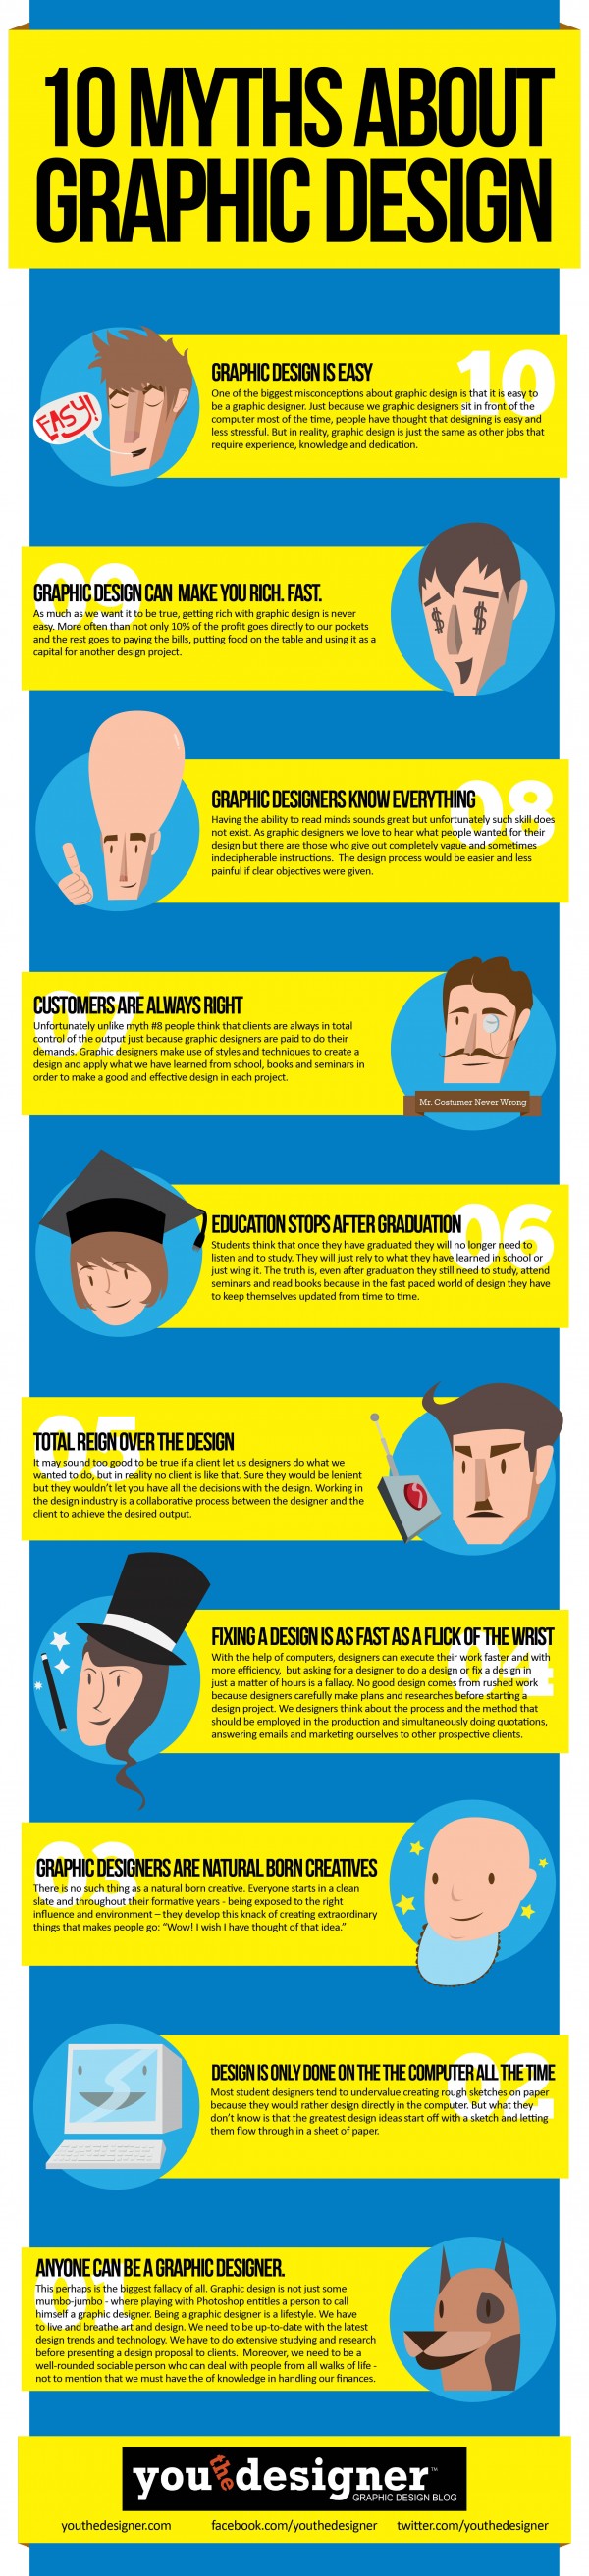 Infographic About Graphic Design